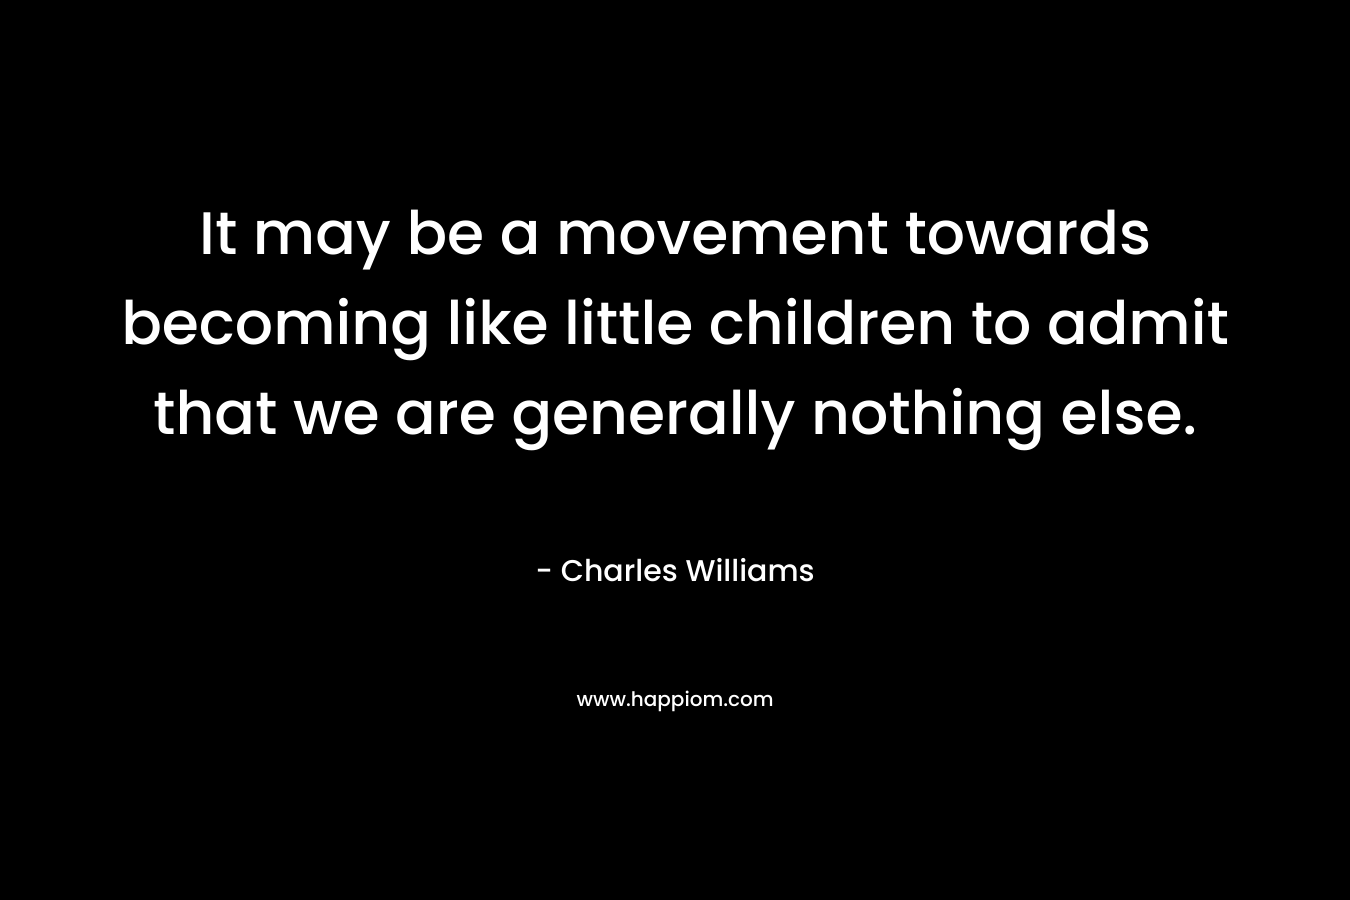 It may be a movement towards becoming like little children to admit that we are generally nothing else.